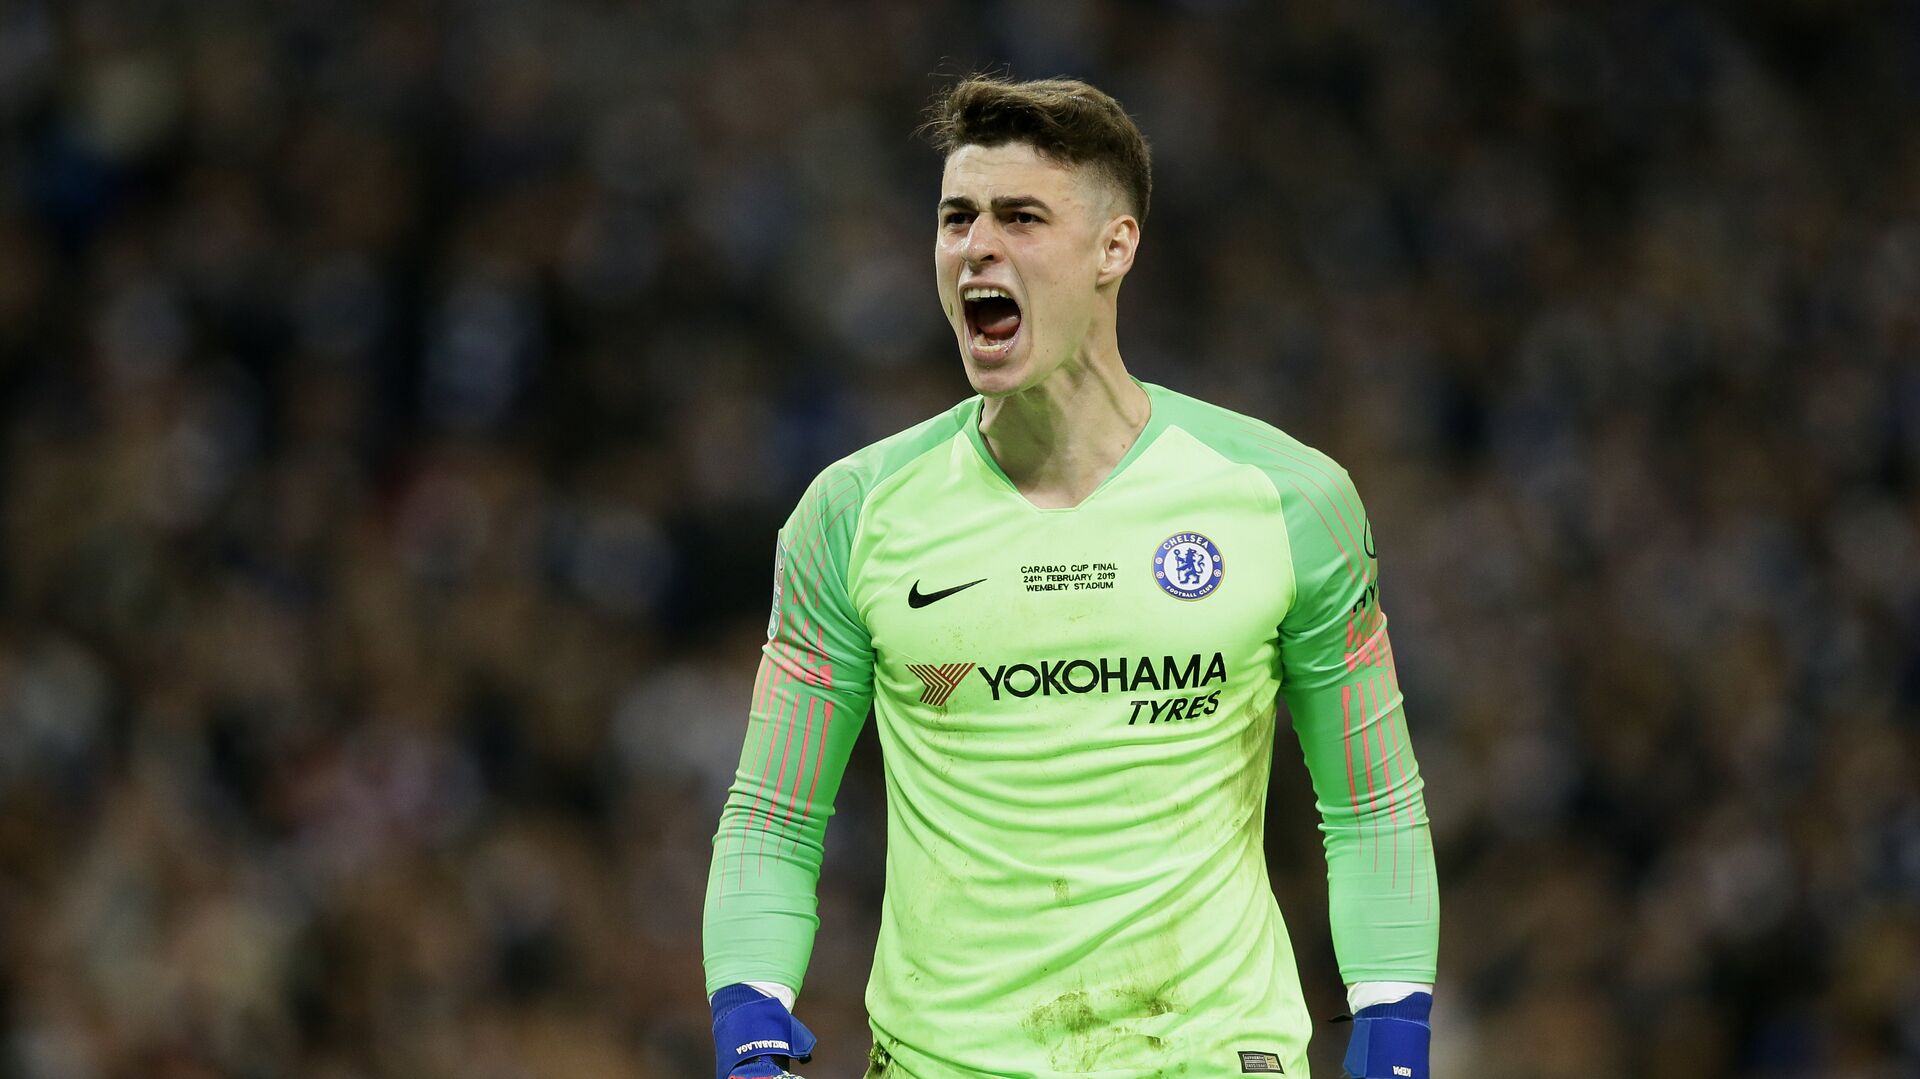 Chelsea's goalkeeper Kepa Arrizabalaga screams at the bench after refusing to be substituted at Wembley on 24 February 2019 - اسپوتنیک افغانستان  , 1920, 24.12.2021